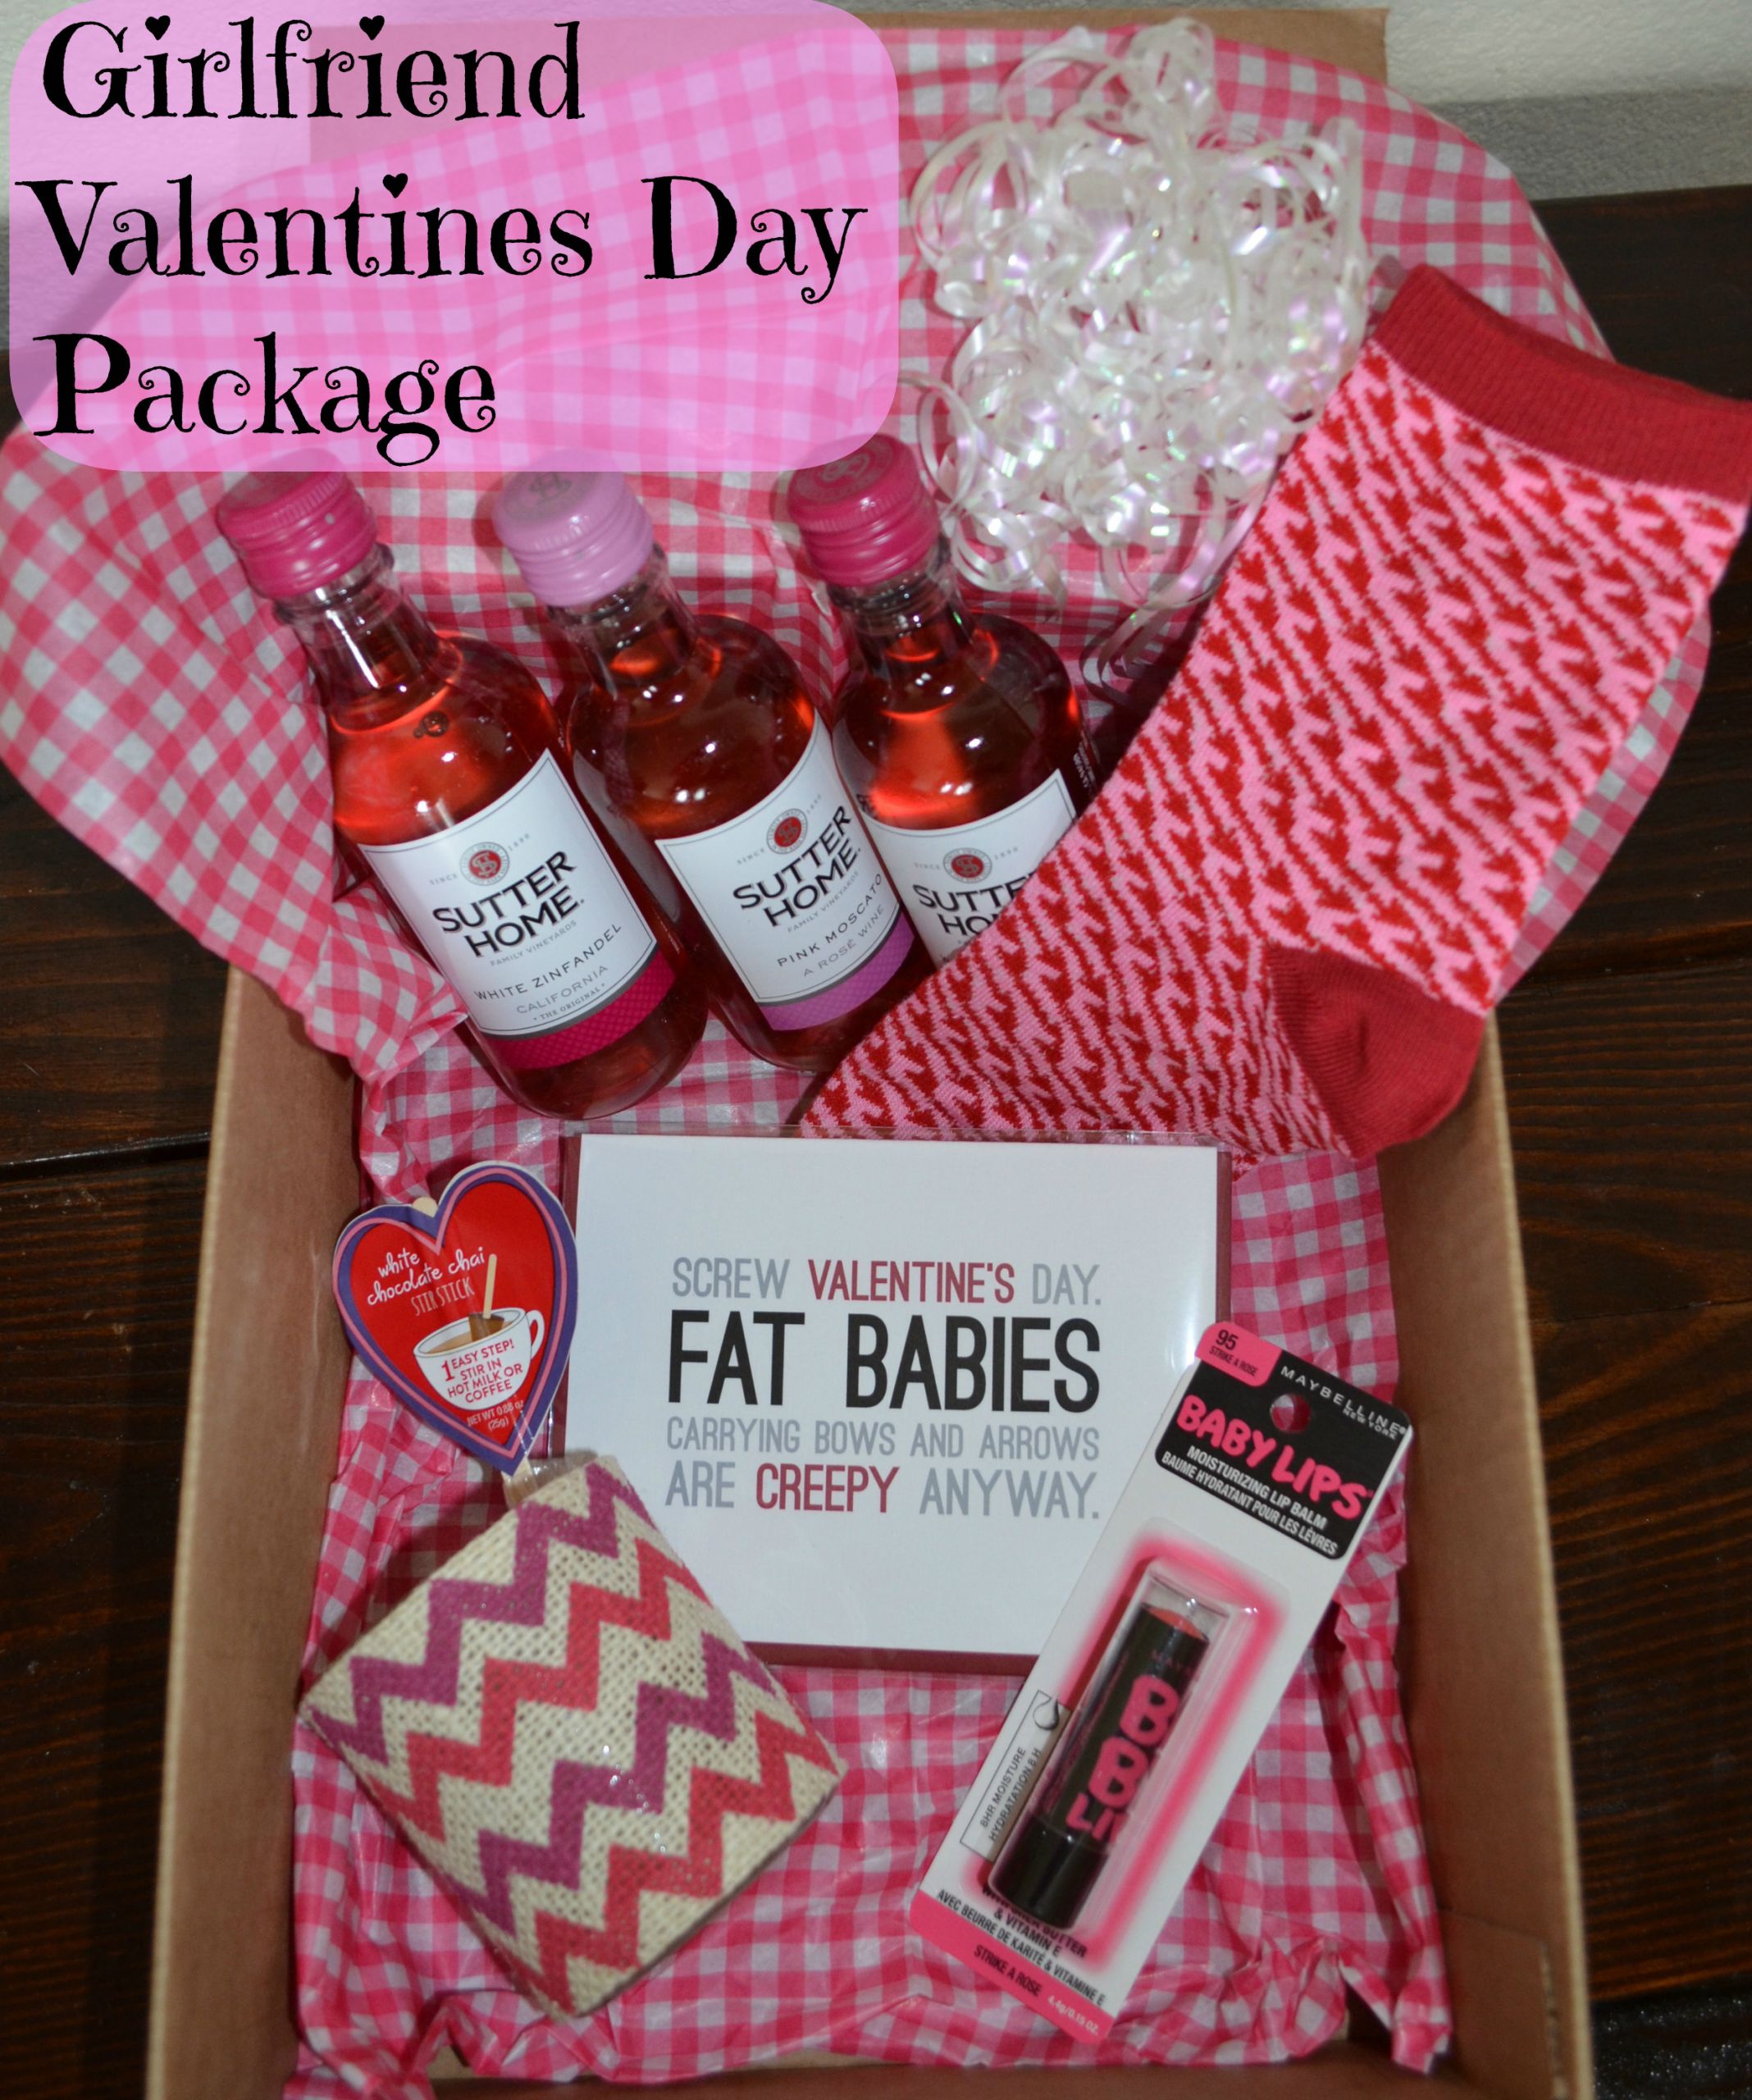 Cute Valentines Day Gift Ideas
 24 ADORABLE GIFT IDEAS FOR THE WOMEN IN YOUR LIFE